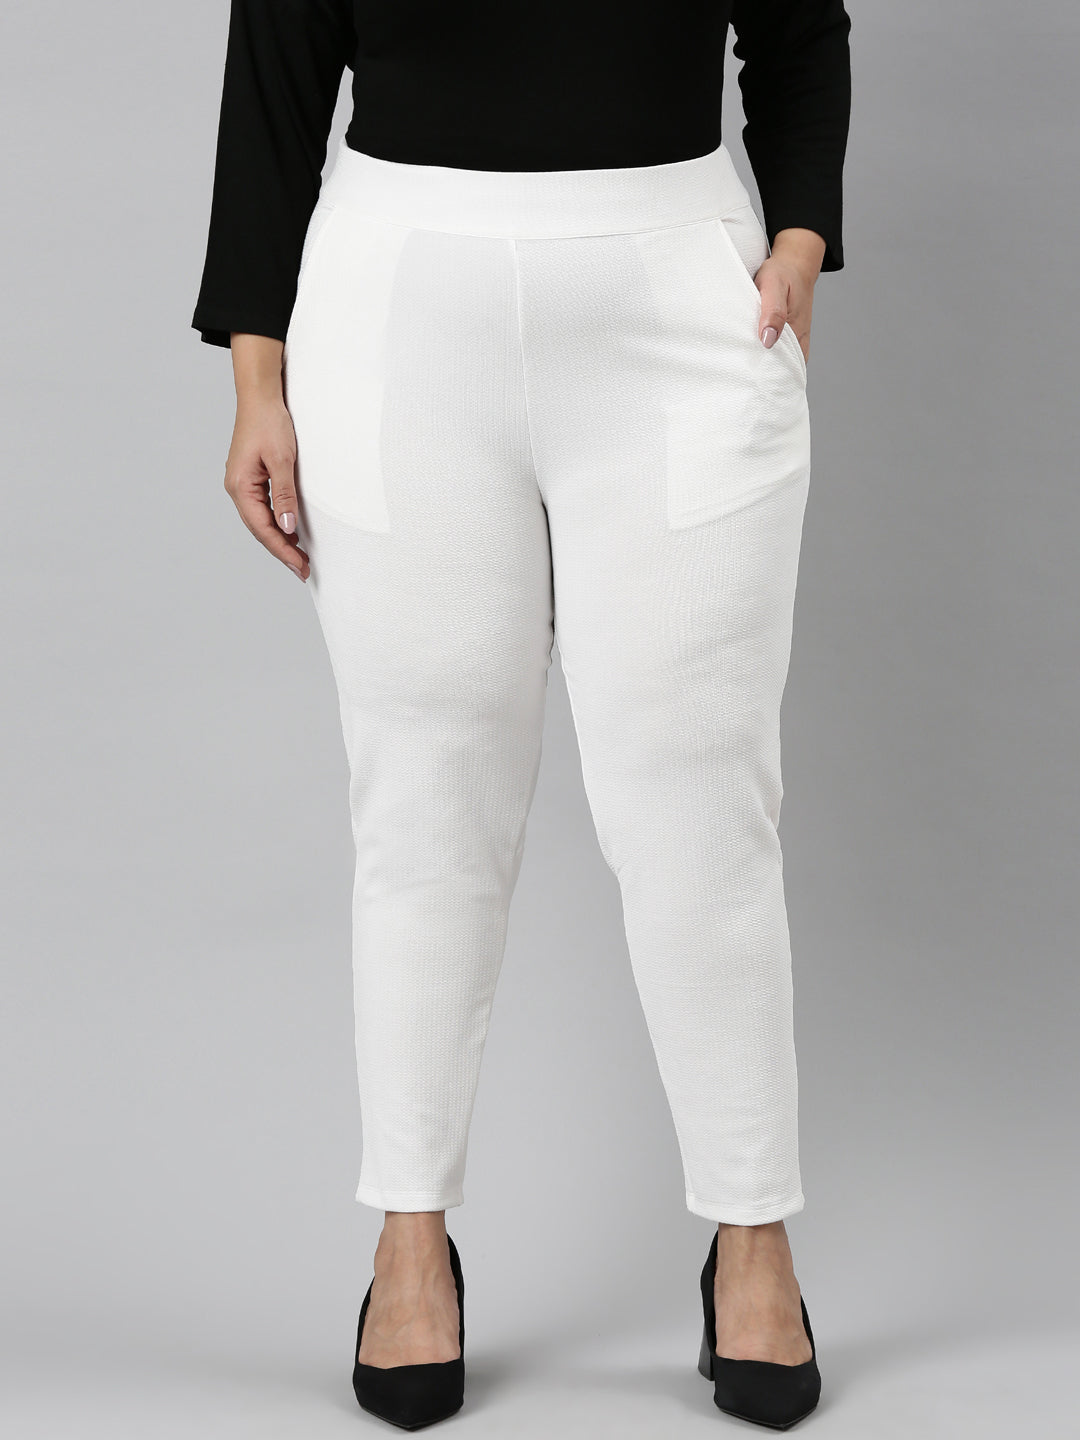 Buy White Stretch Pants For Curvy Women Online – The Pink Moon